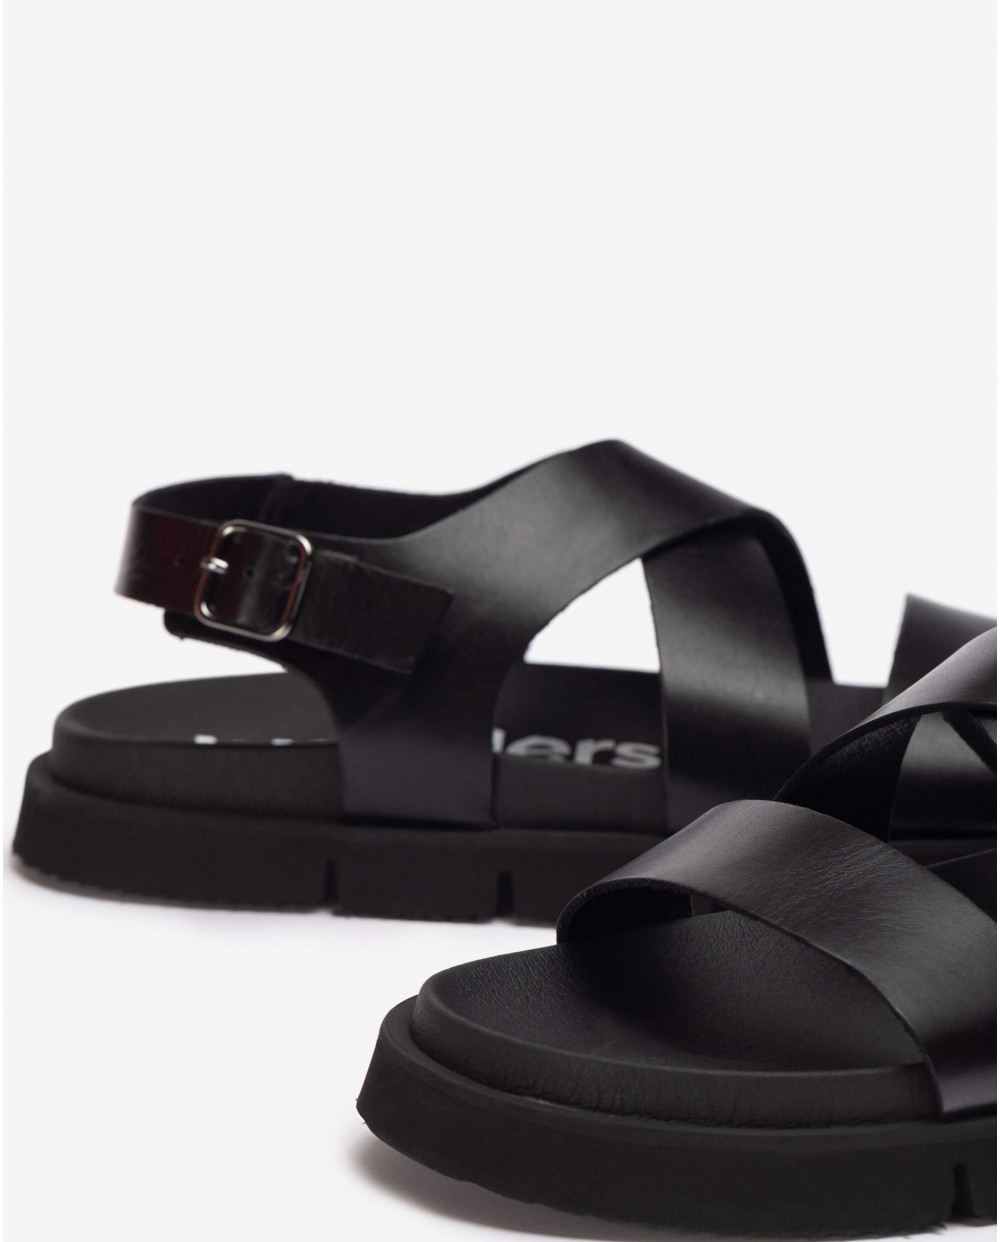 Leather sandal with cross over straps